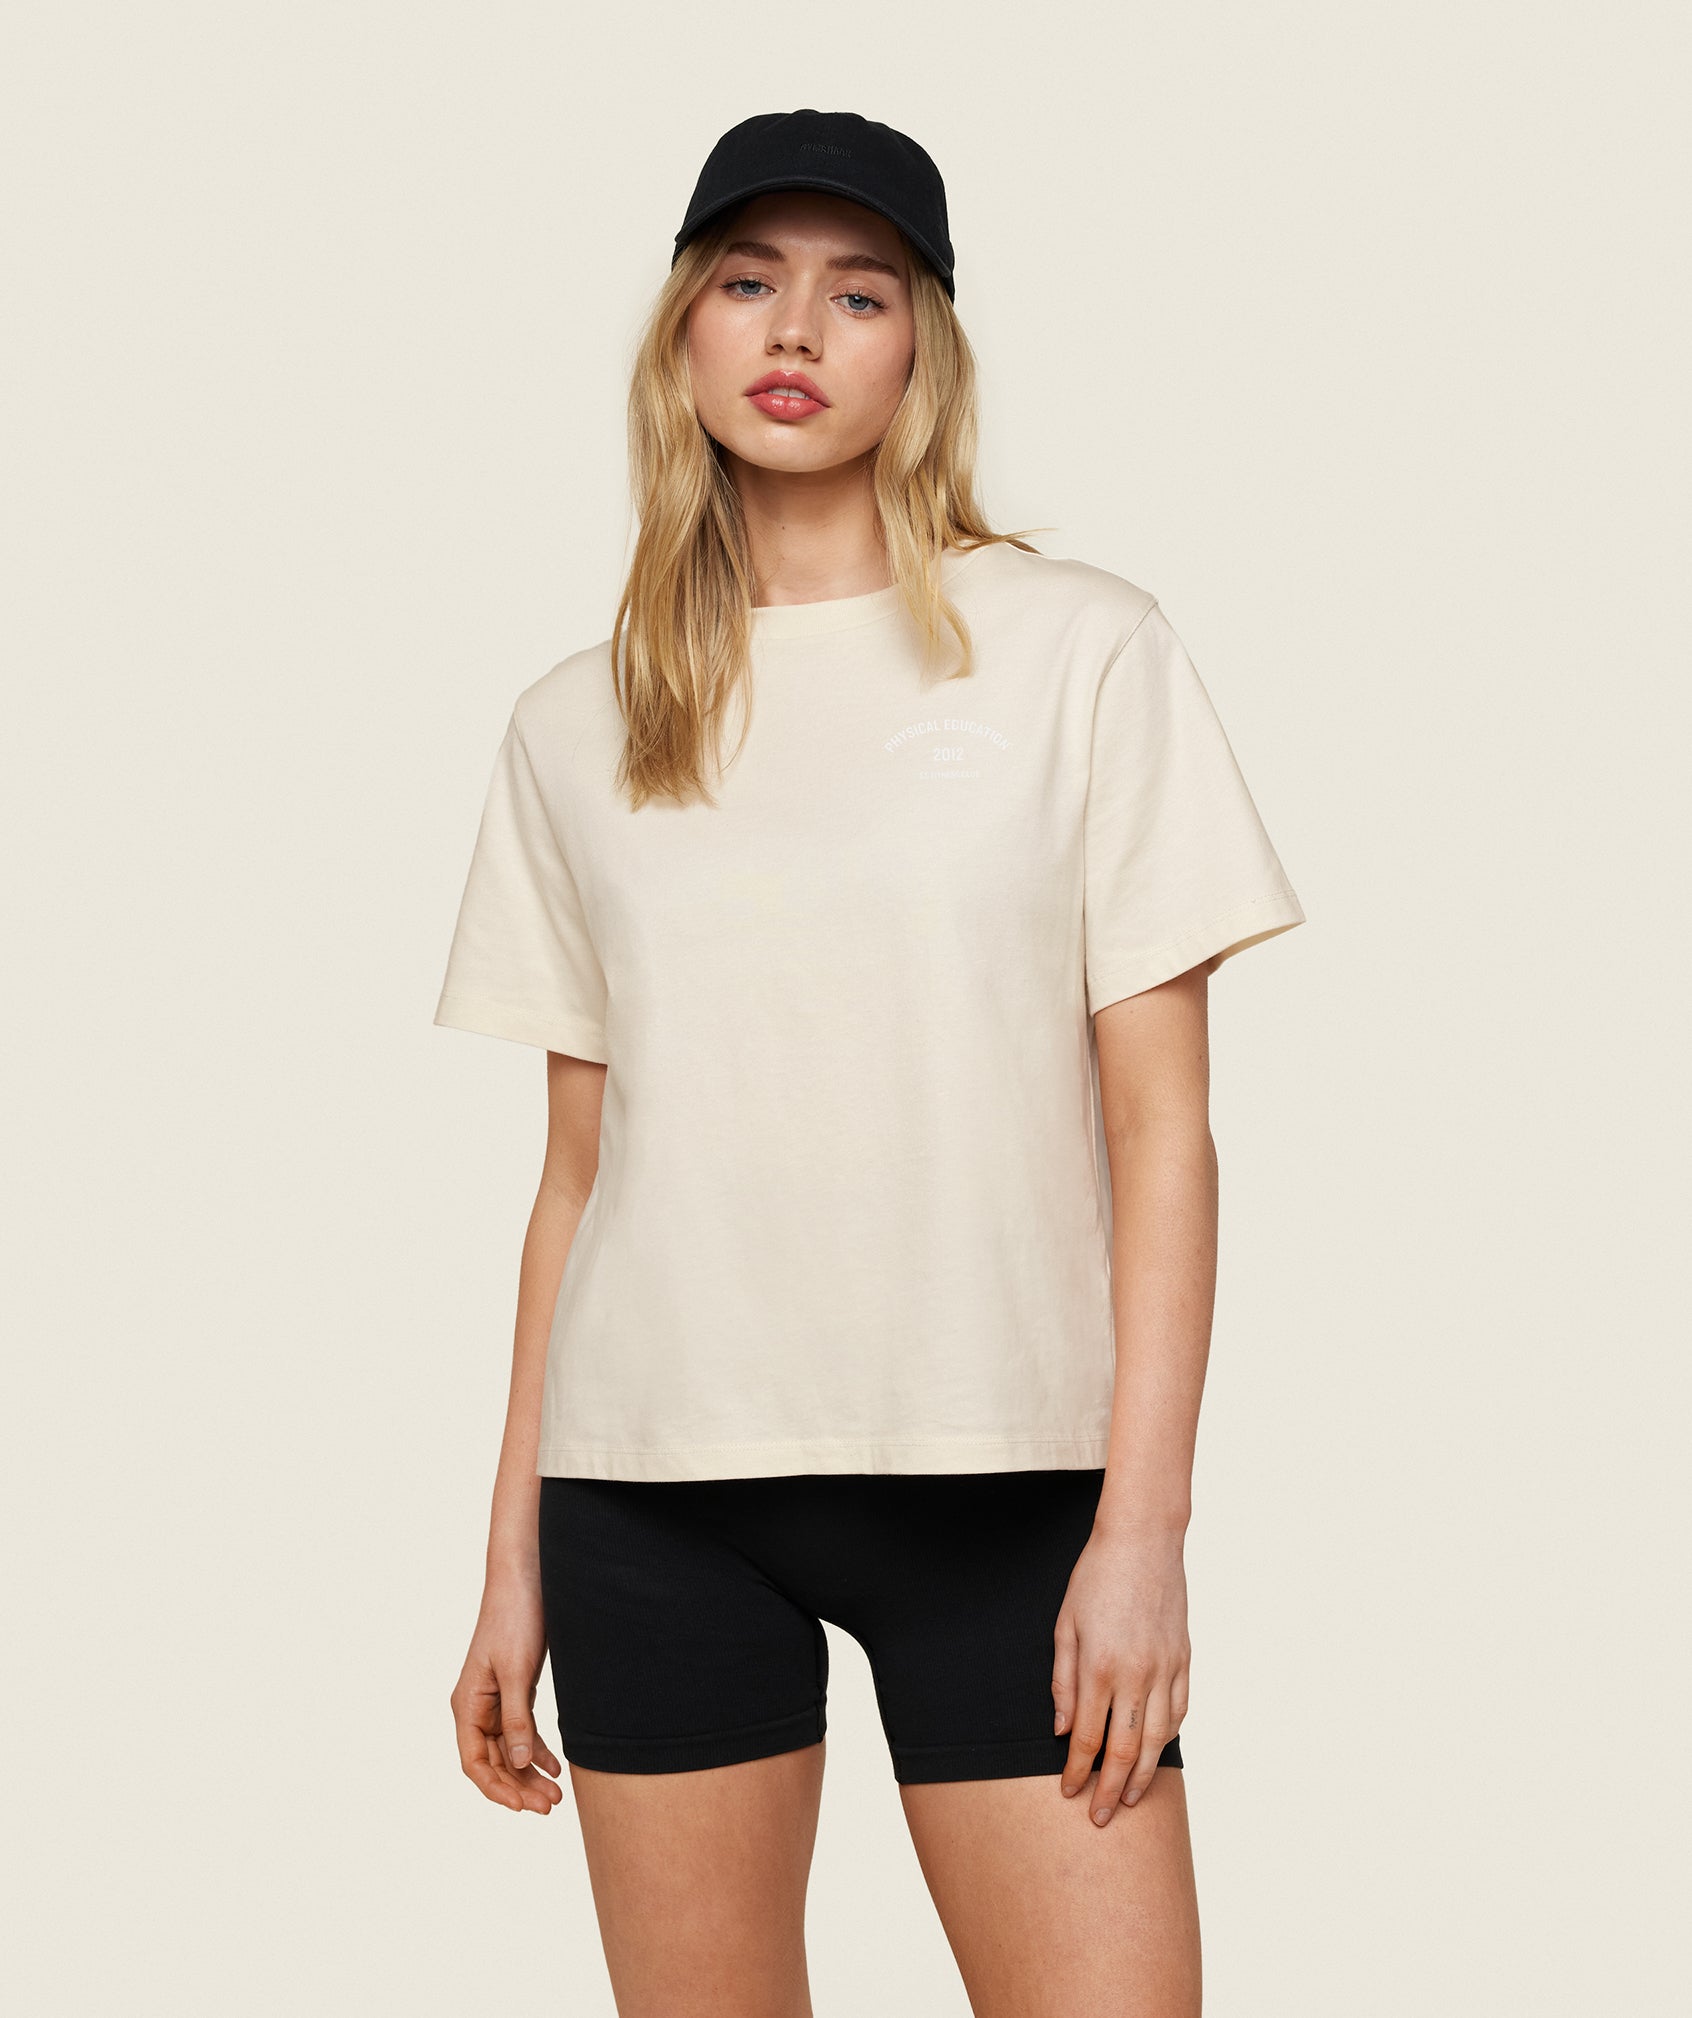 Phys Ed Graphic T-Shirt in Ecru White - view 1